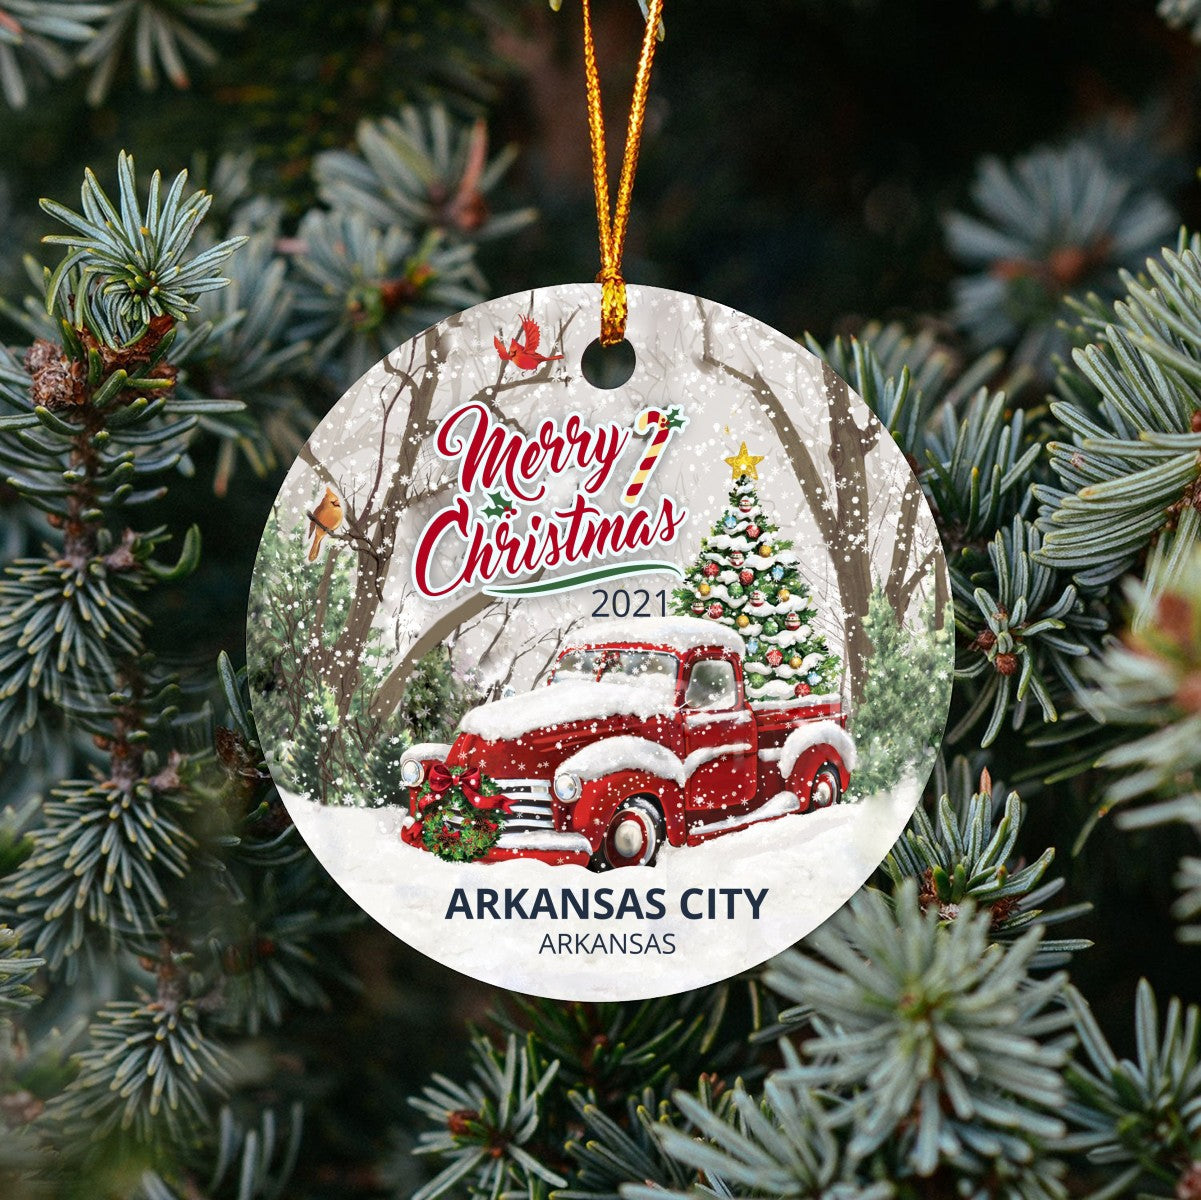 Christmas Tree Ornaments Arkansas City - Ornament With Name City, State Arkansas City Arkansas AR Ornament - Red Truck Xmas Ornaments 3'' Plastic Gift For Family, Friend And Housewarming